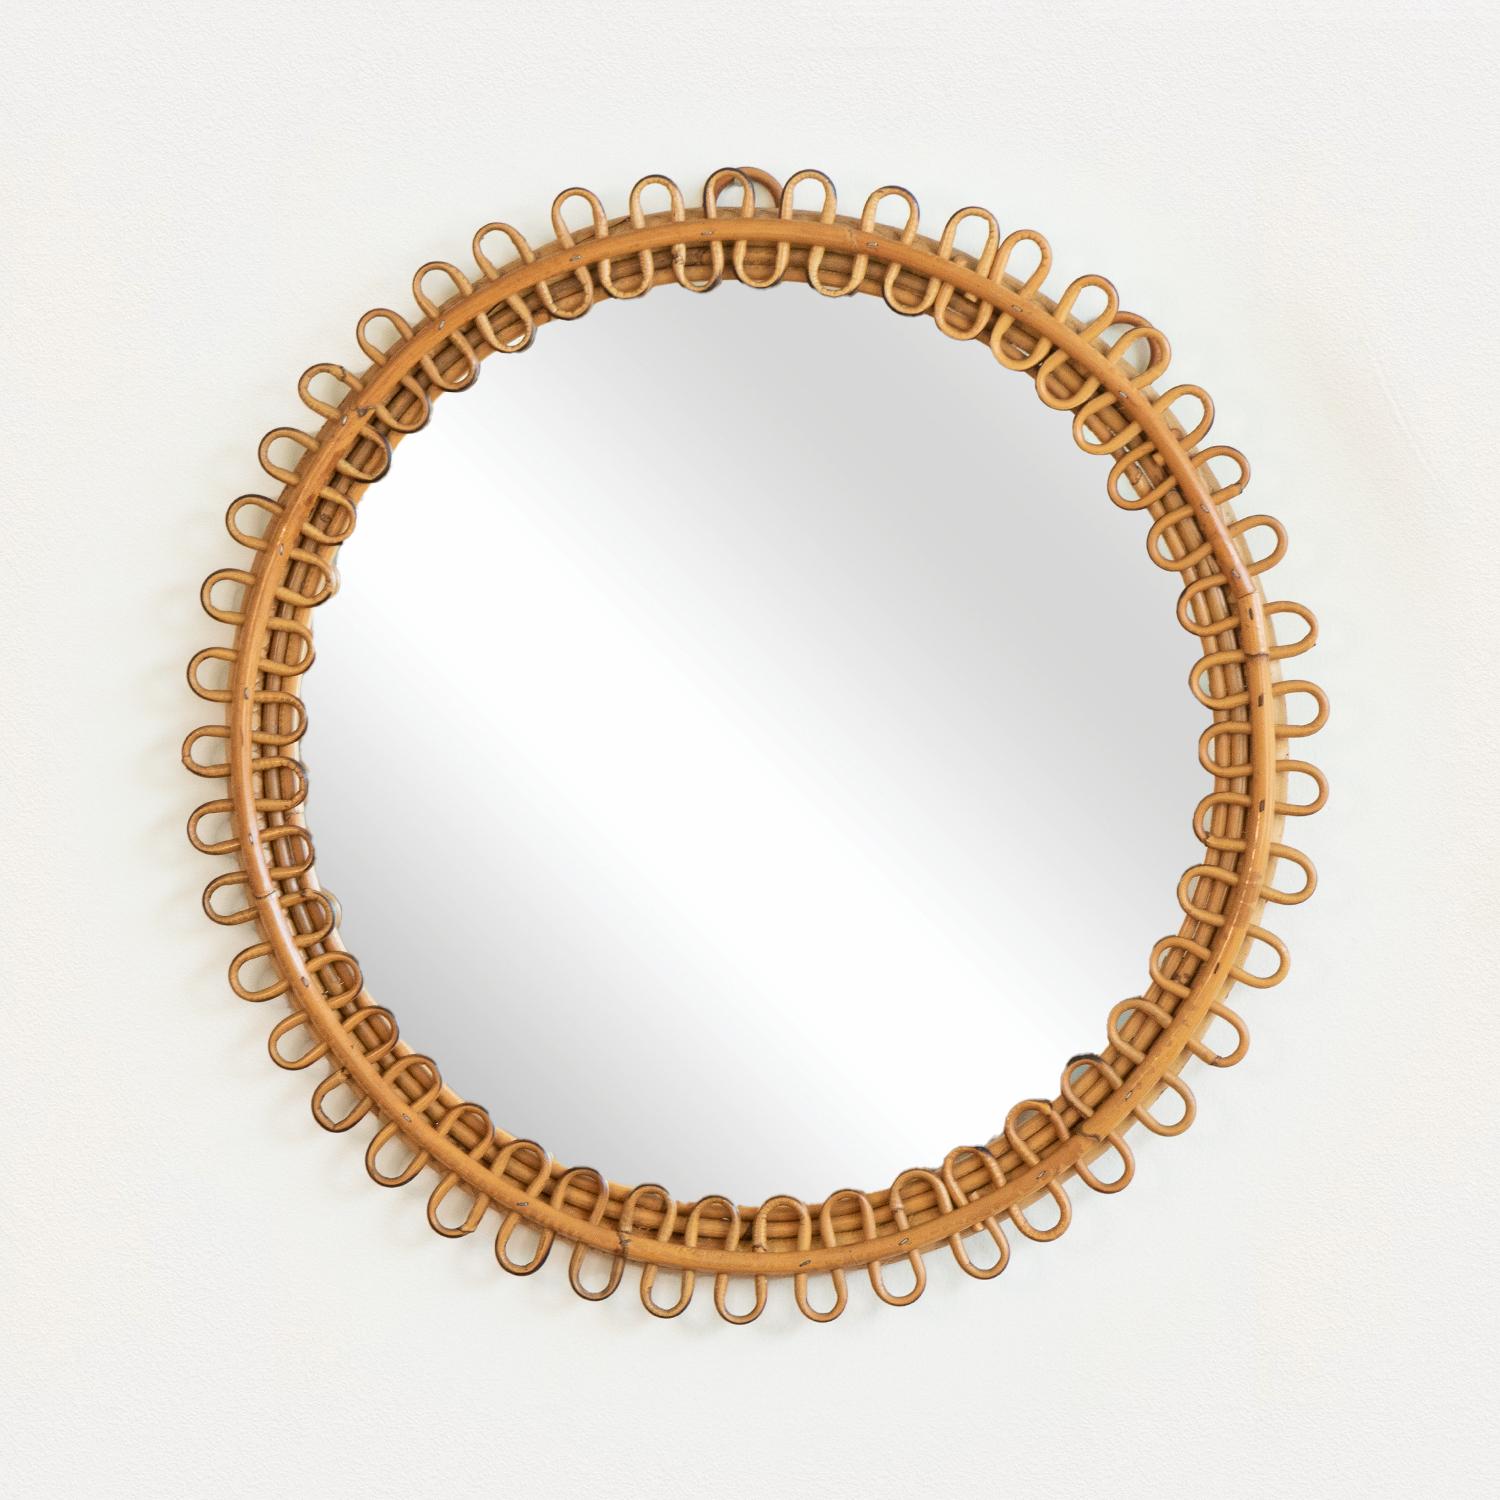 Beautiful rattan mirror in an oval shape from Italy, 1960s. Unique design with looped rattan detailing encompassing the mirror. Statement piece perfect for bathroom or entryway. Nice vintage condition with original coloring and original mirror.